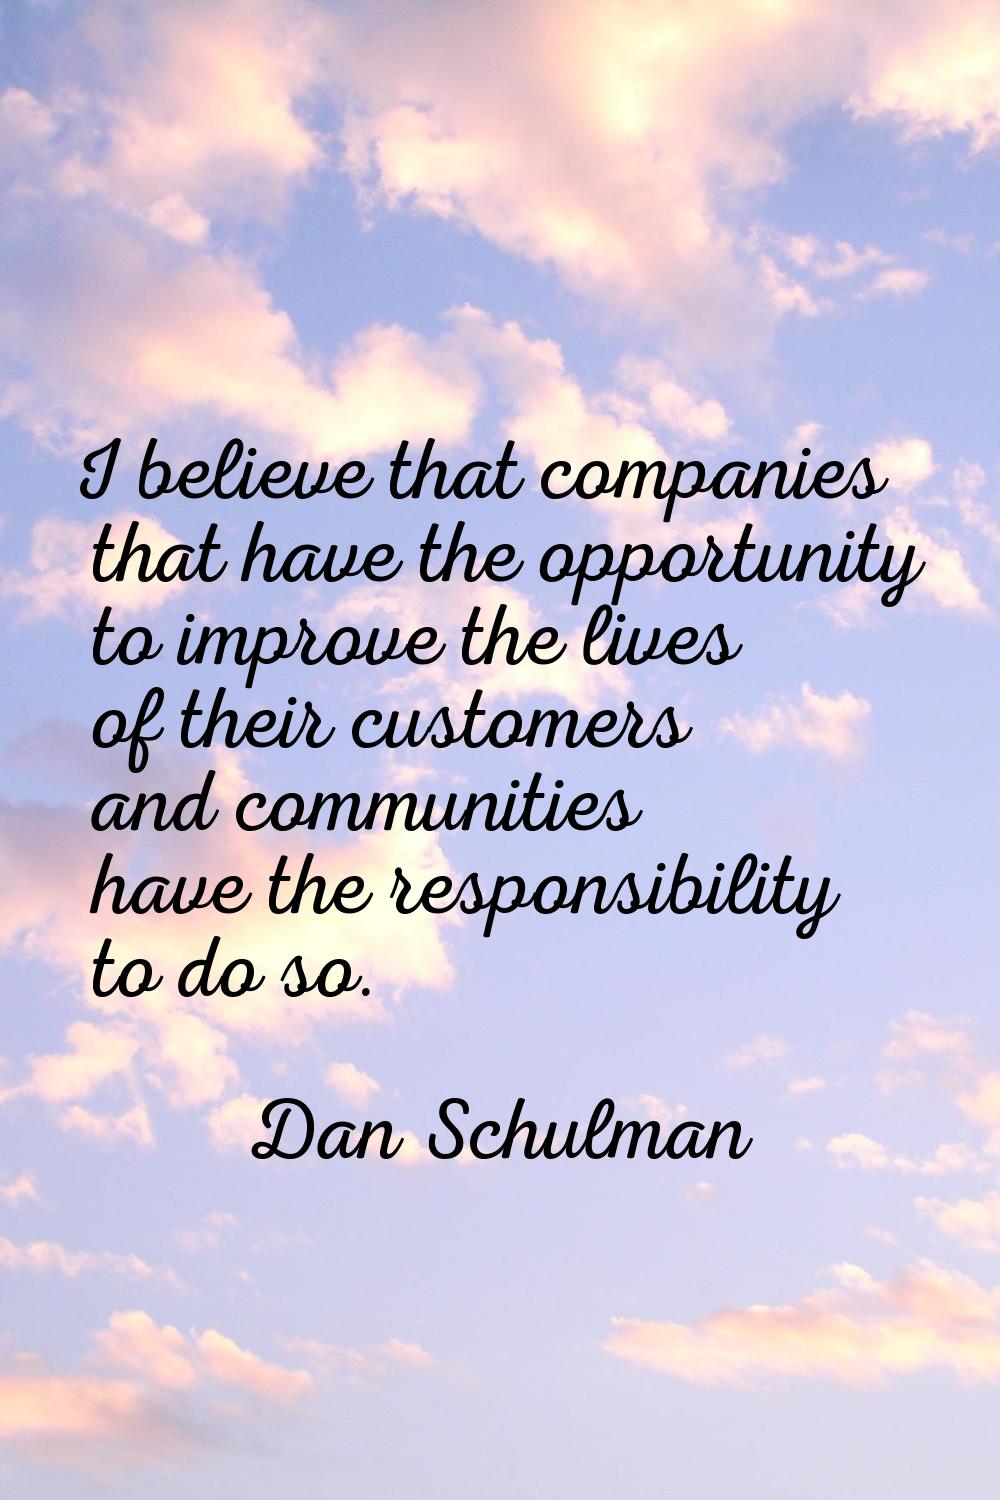 I believe that companies that have the opportunity to improve the lives of their customers and comm